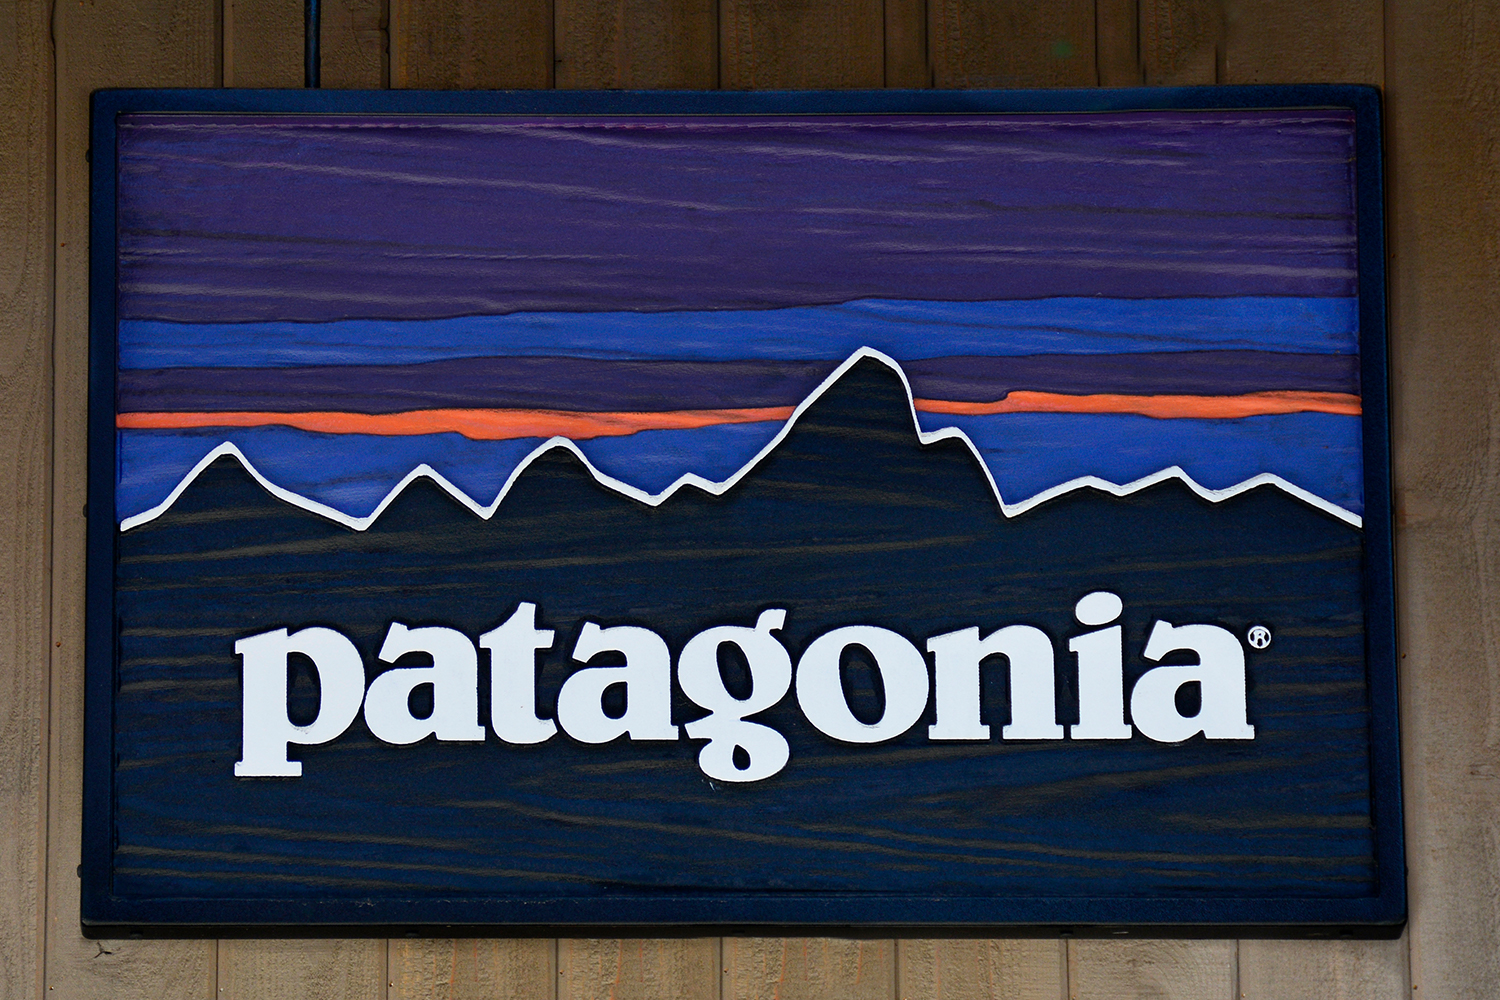 A sign hangs over the entrance to the Patagonia outdoor clothing shop in Vail, Colorado